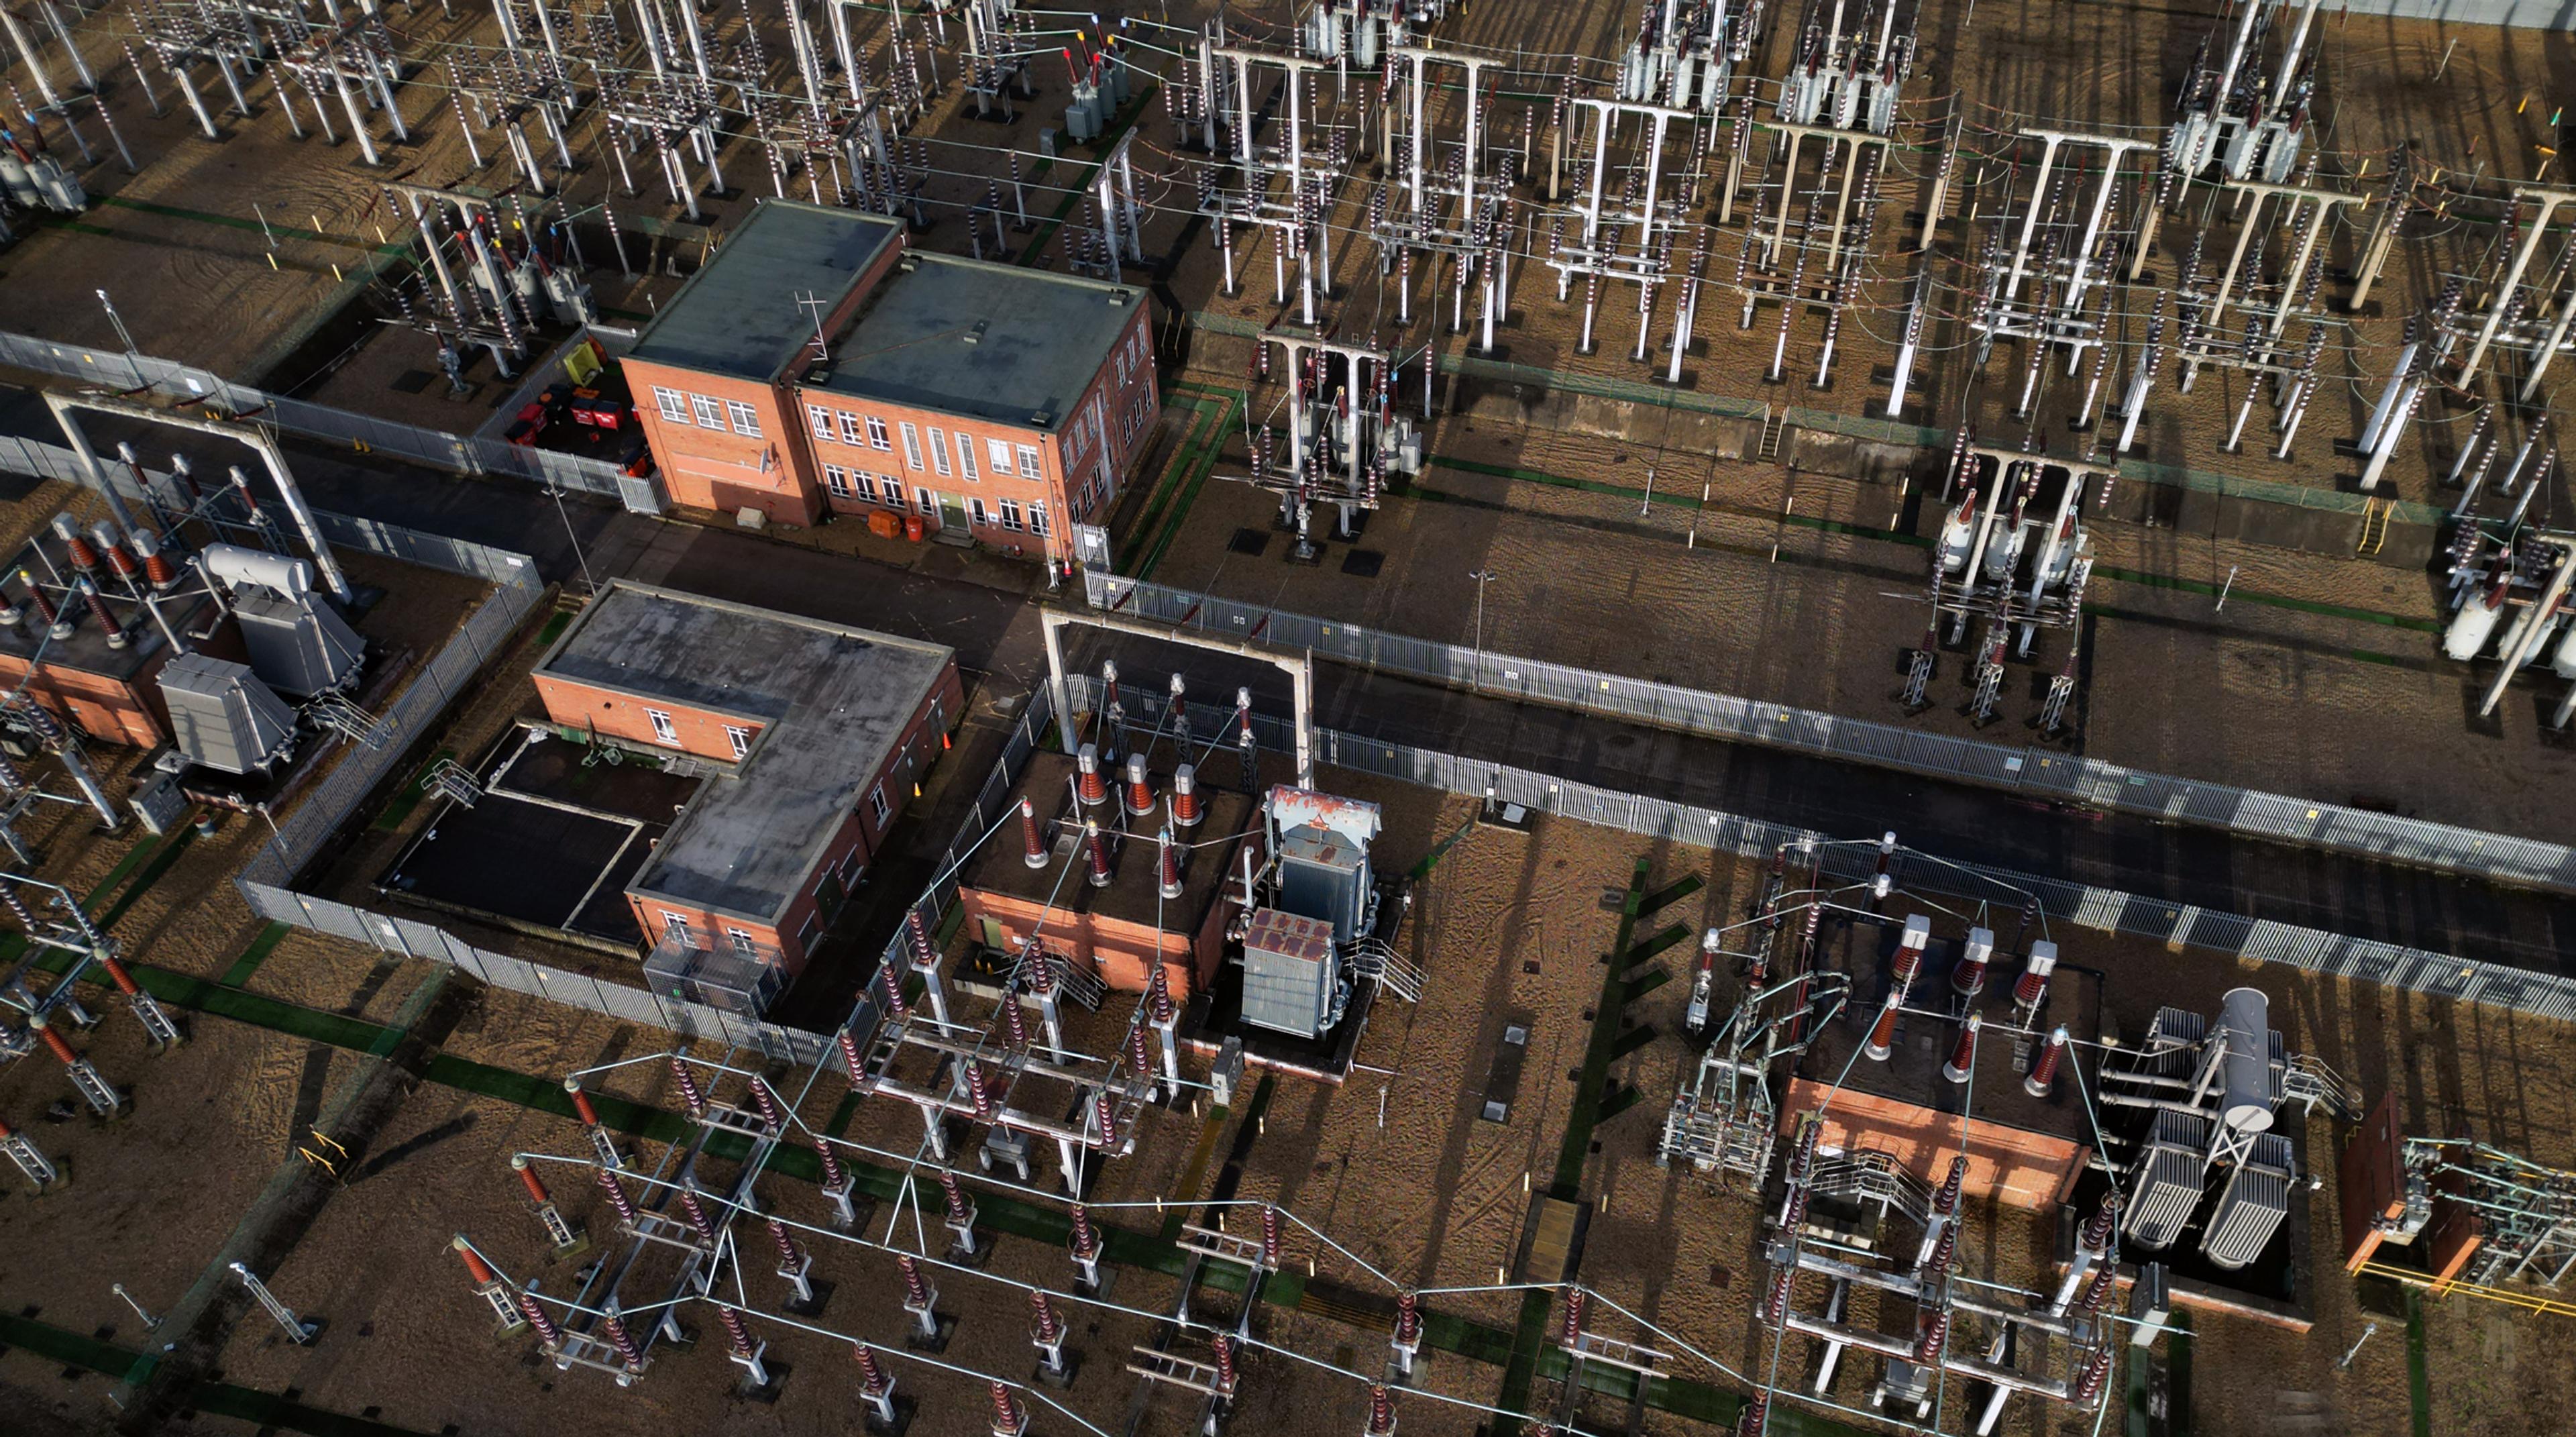 Aerial view of a high voltage electrical sub-station